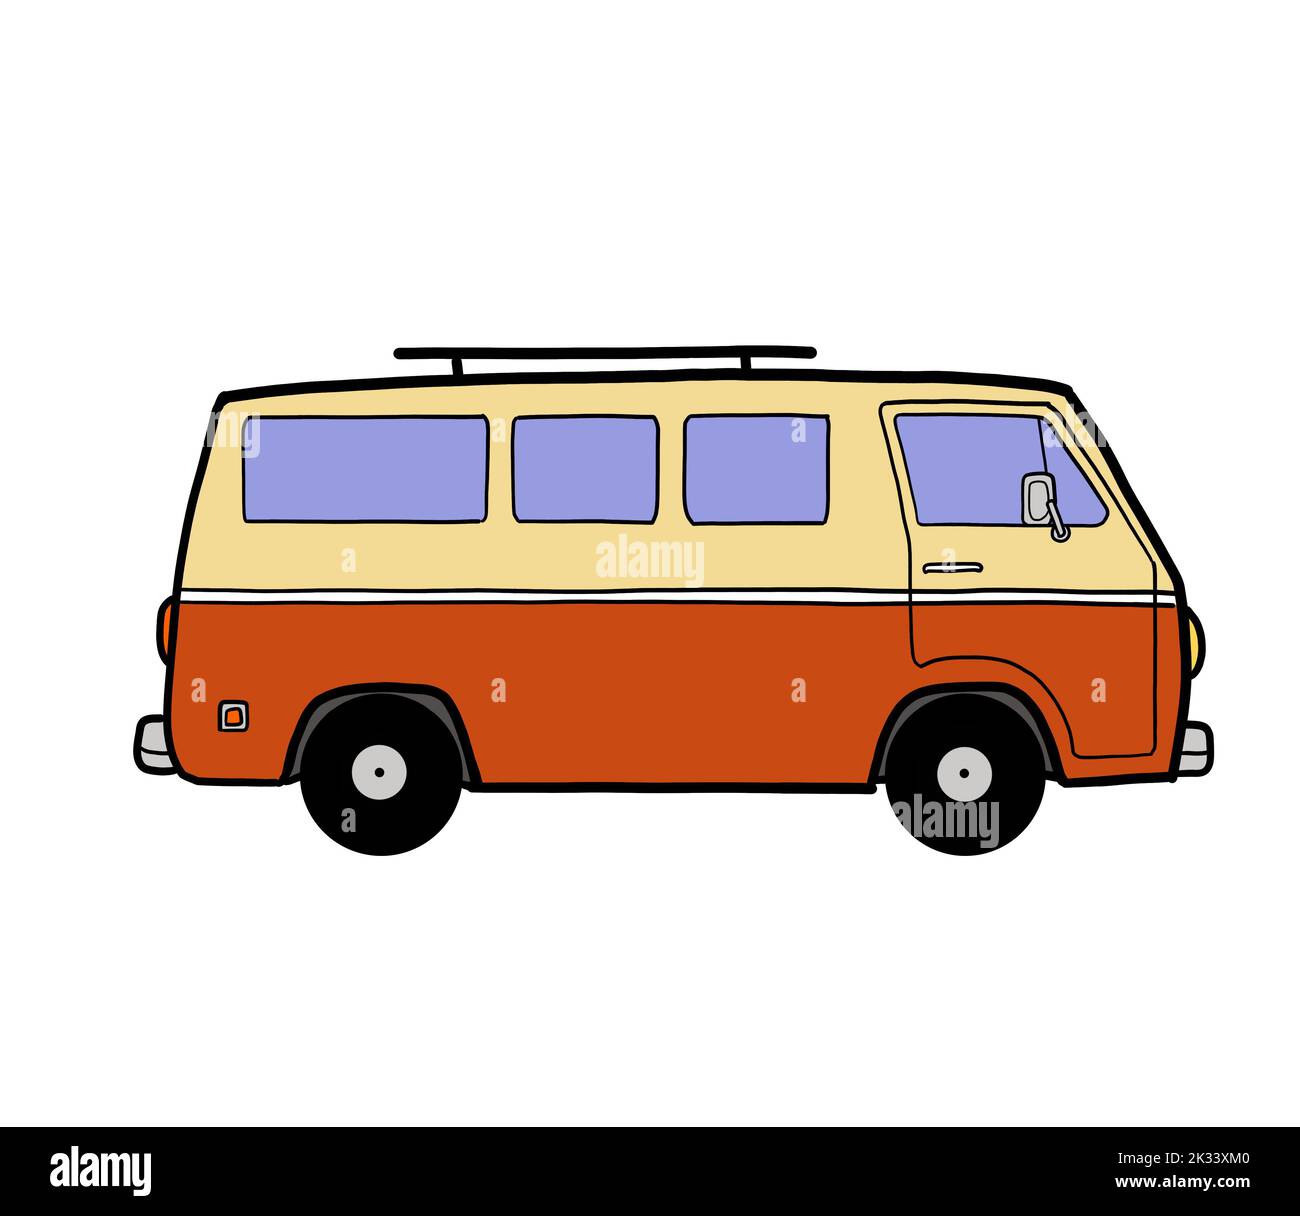 A red color camper van car vehicle or motorhome. Hand drawing, isolated on white background. Van life road trip freedom lifestyle. Stock Photo